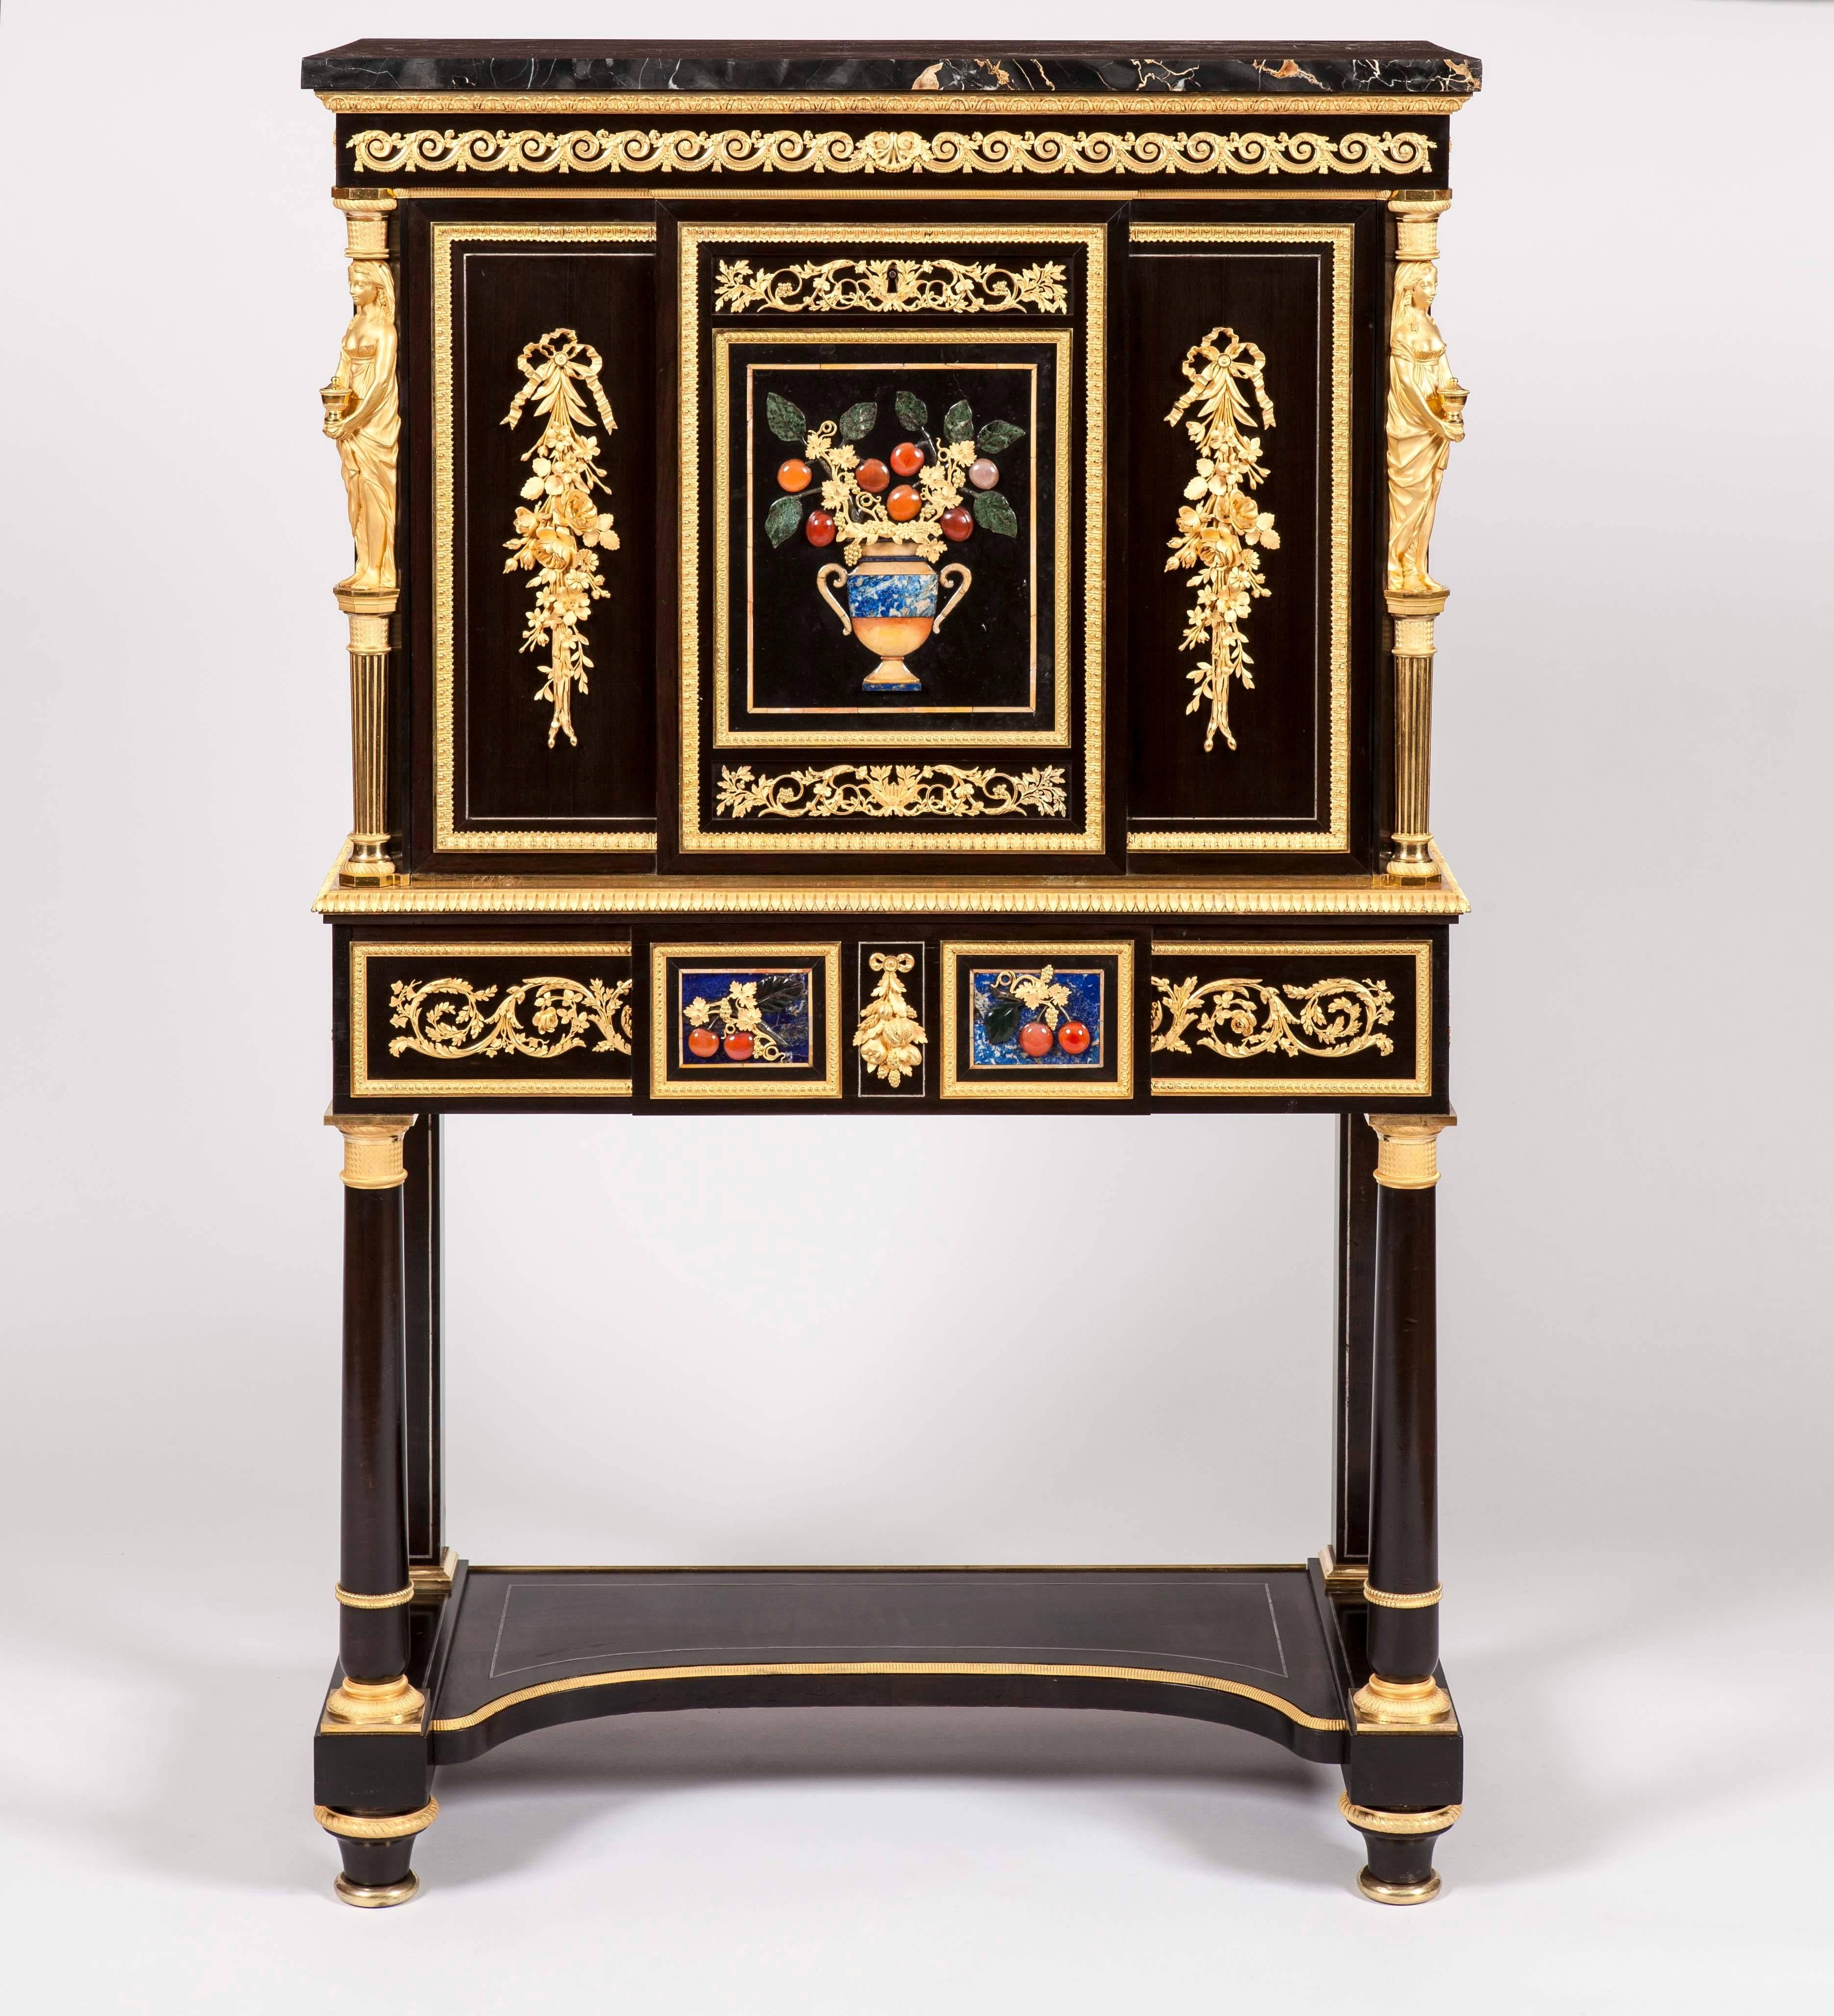 A fine pair of secrétaires à Abattant
Attributed to Alexandre-Louis Bellangé

Constructed in ebony, and dressed with two-color gold ormolu mounts, made with exceptional refinement, Florentine Pietra Dura panels (with colors of blue, red, orange and